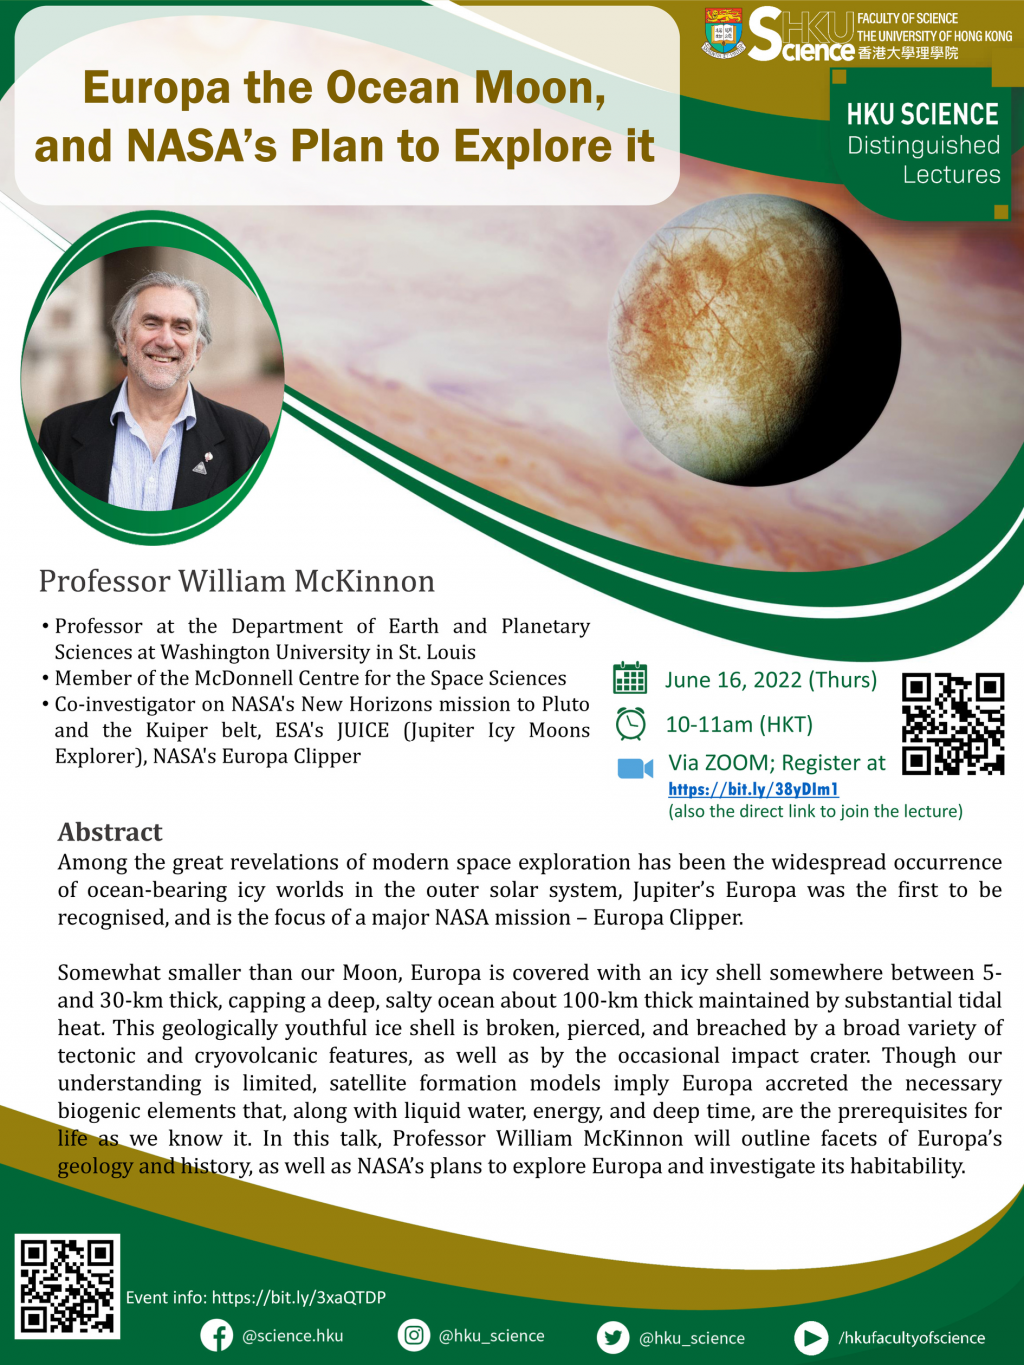 HKU Science Distinguished Lecture@ZOOM - Europa the Ocean Moon, and NASA's Plan to Explore it (June 16, 2022)